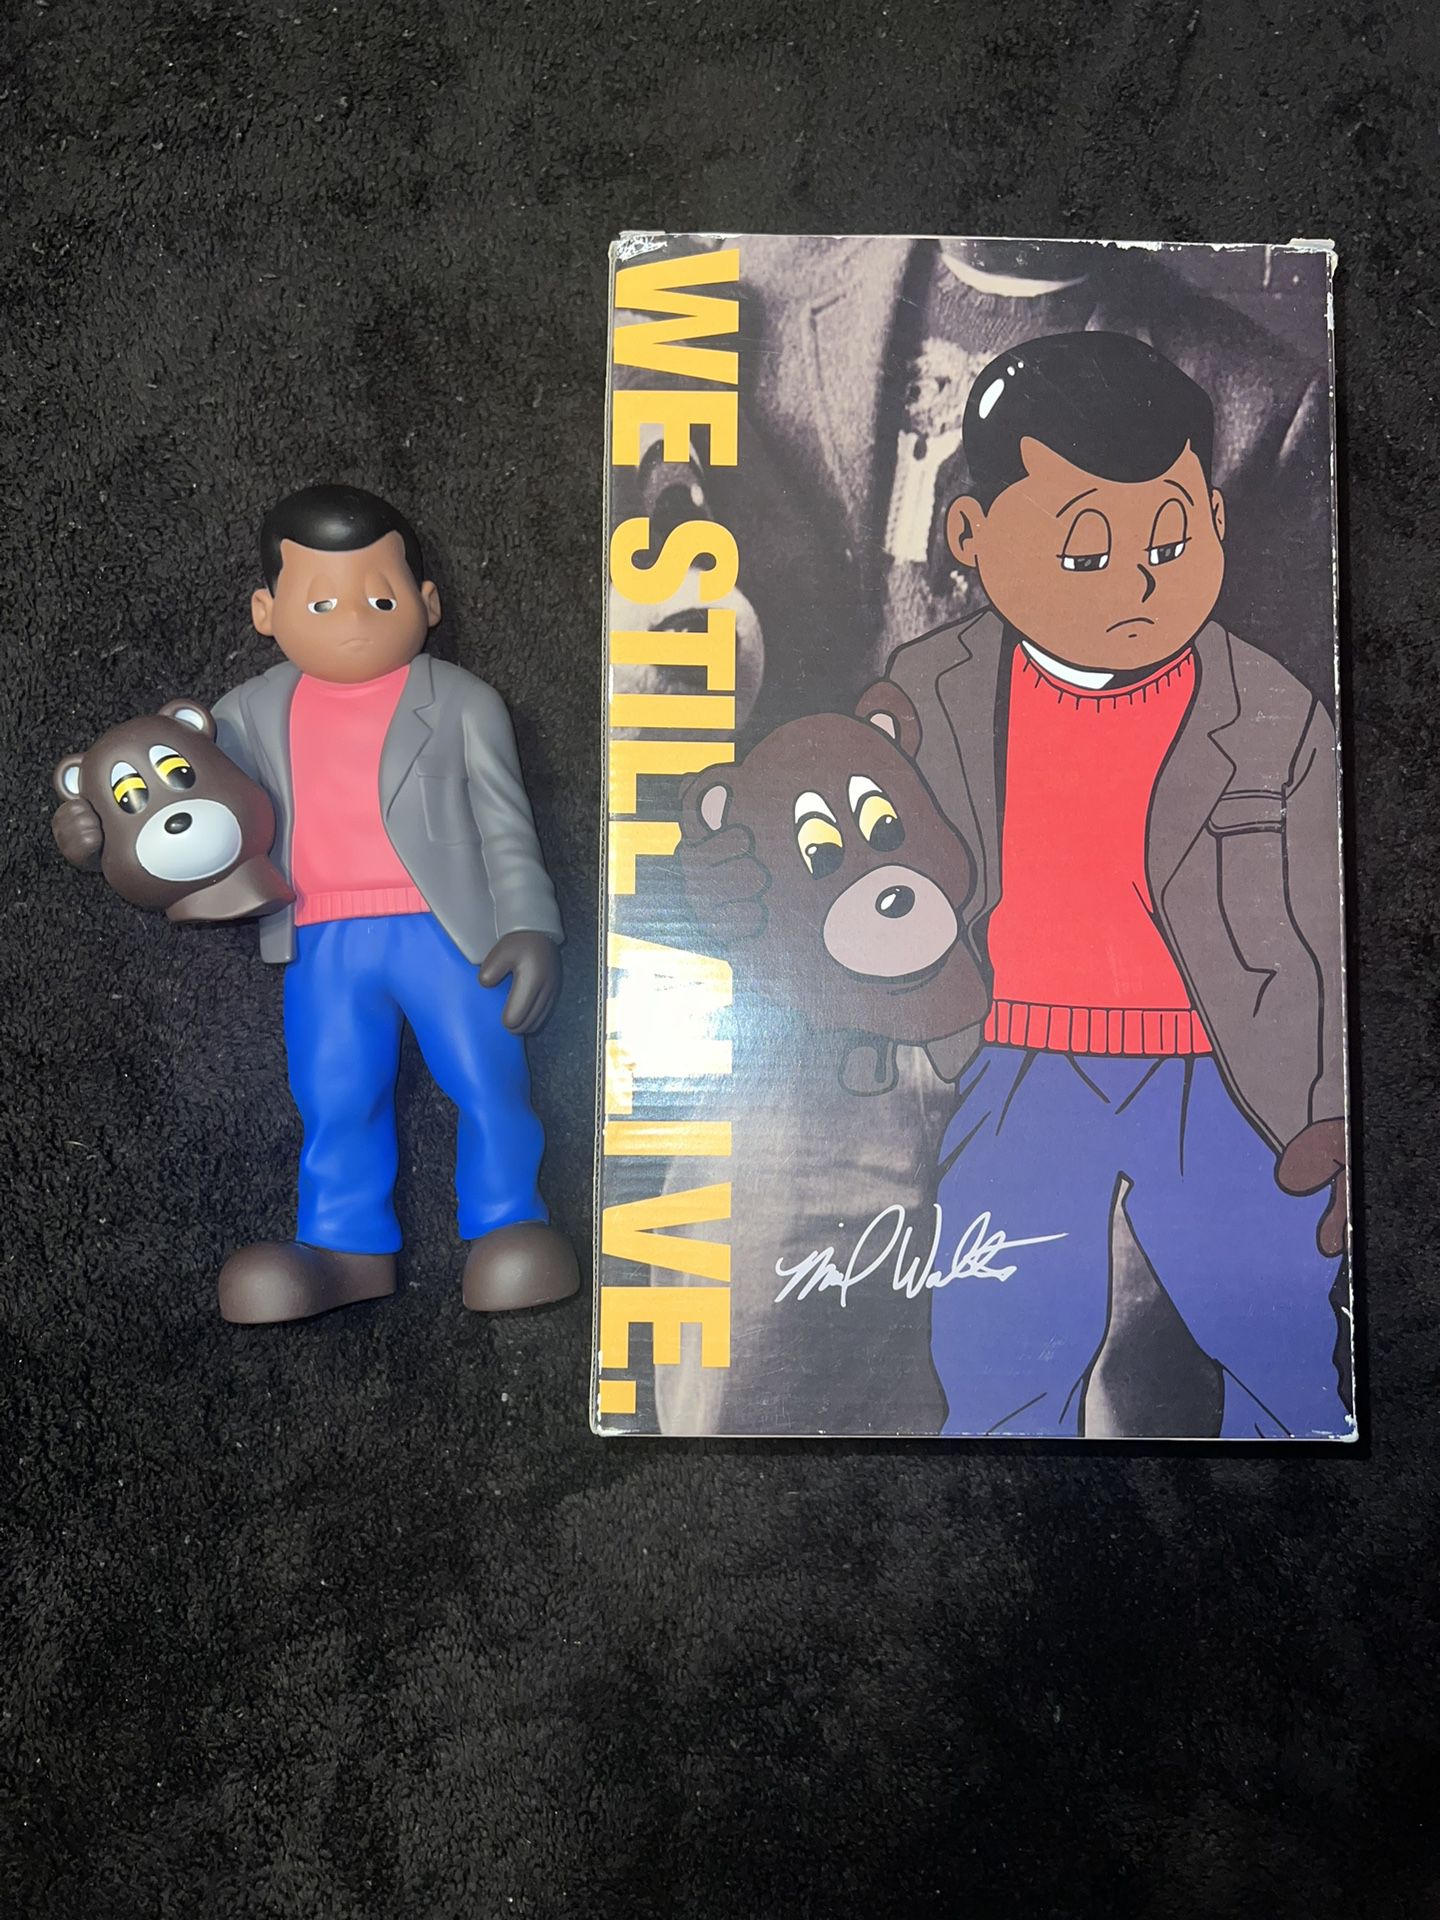 Kanye West “College Drop Out” Collectable Figurine 